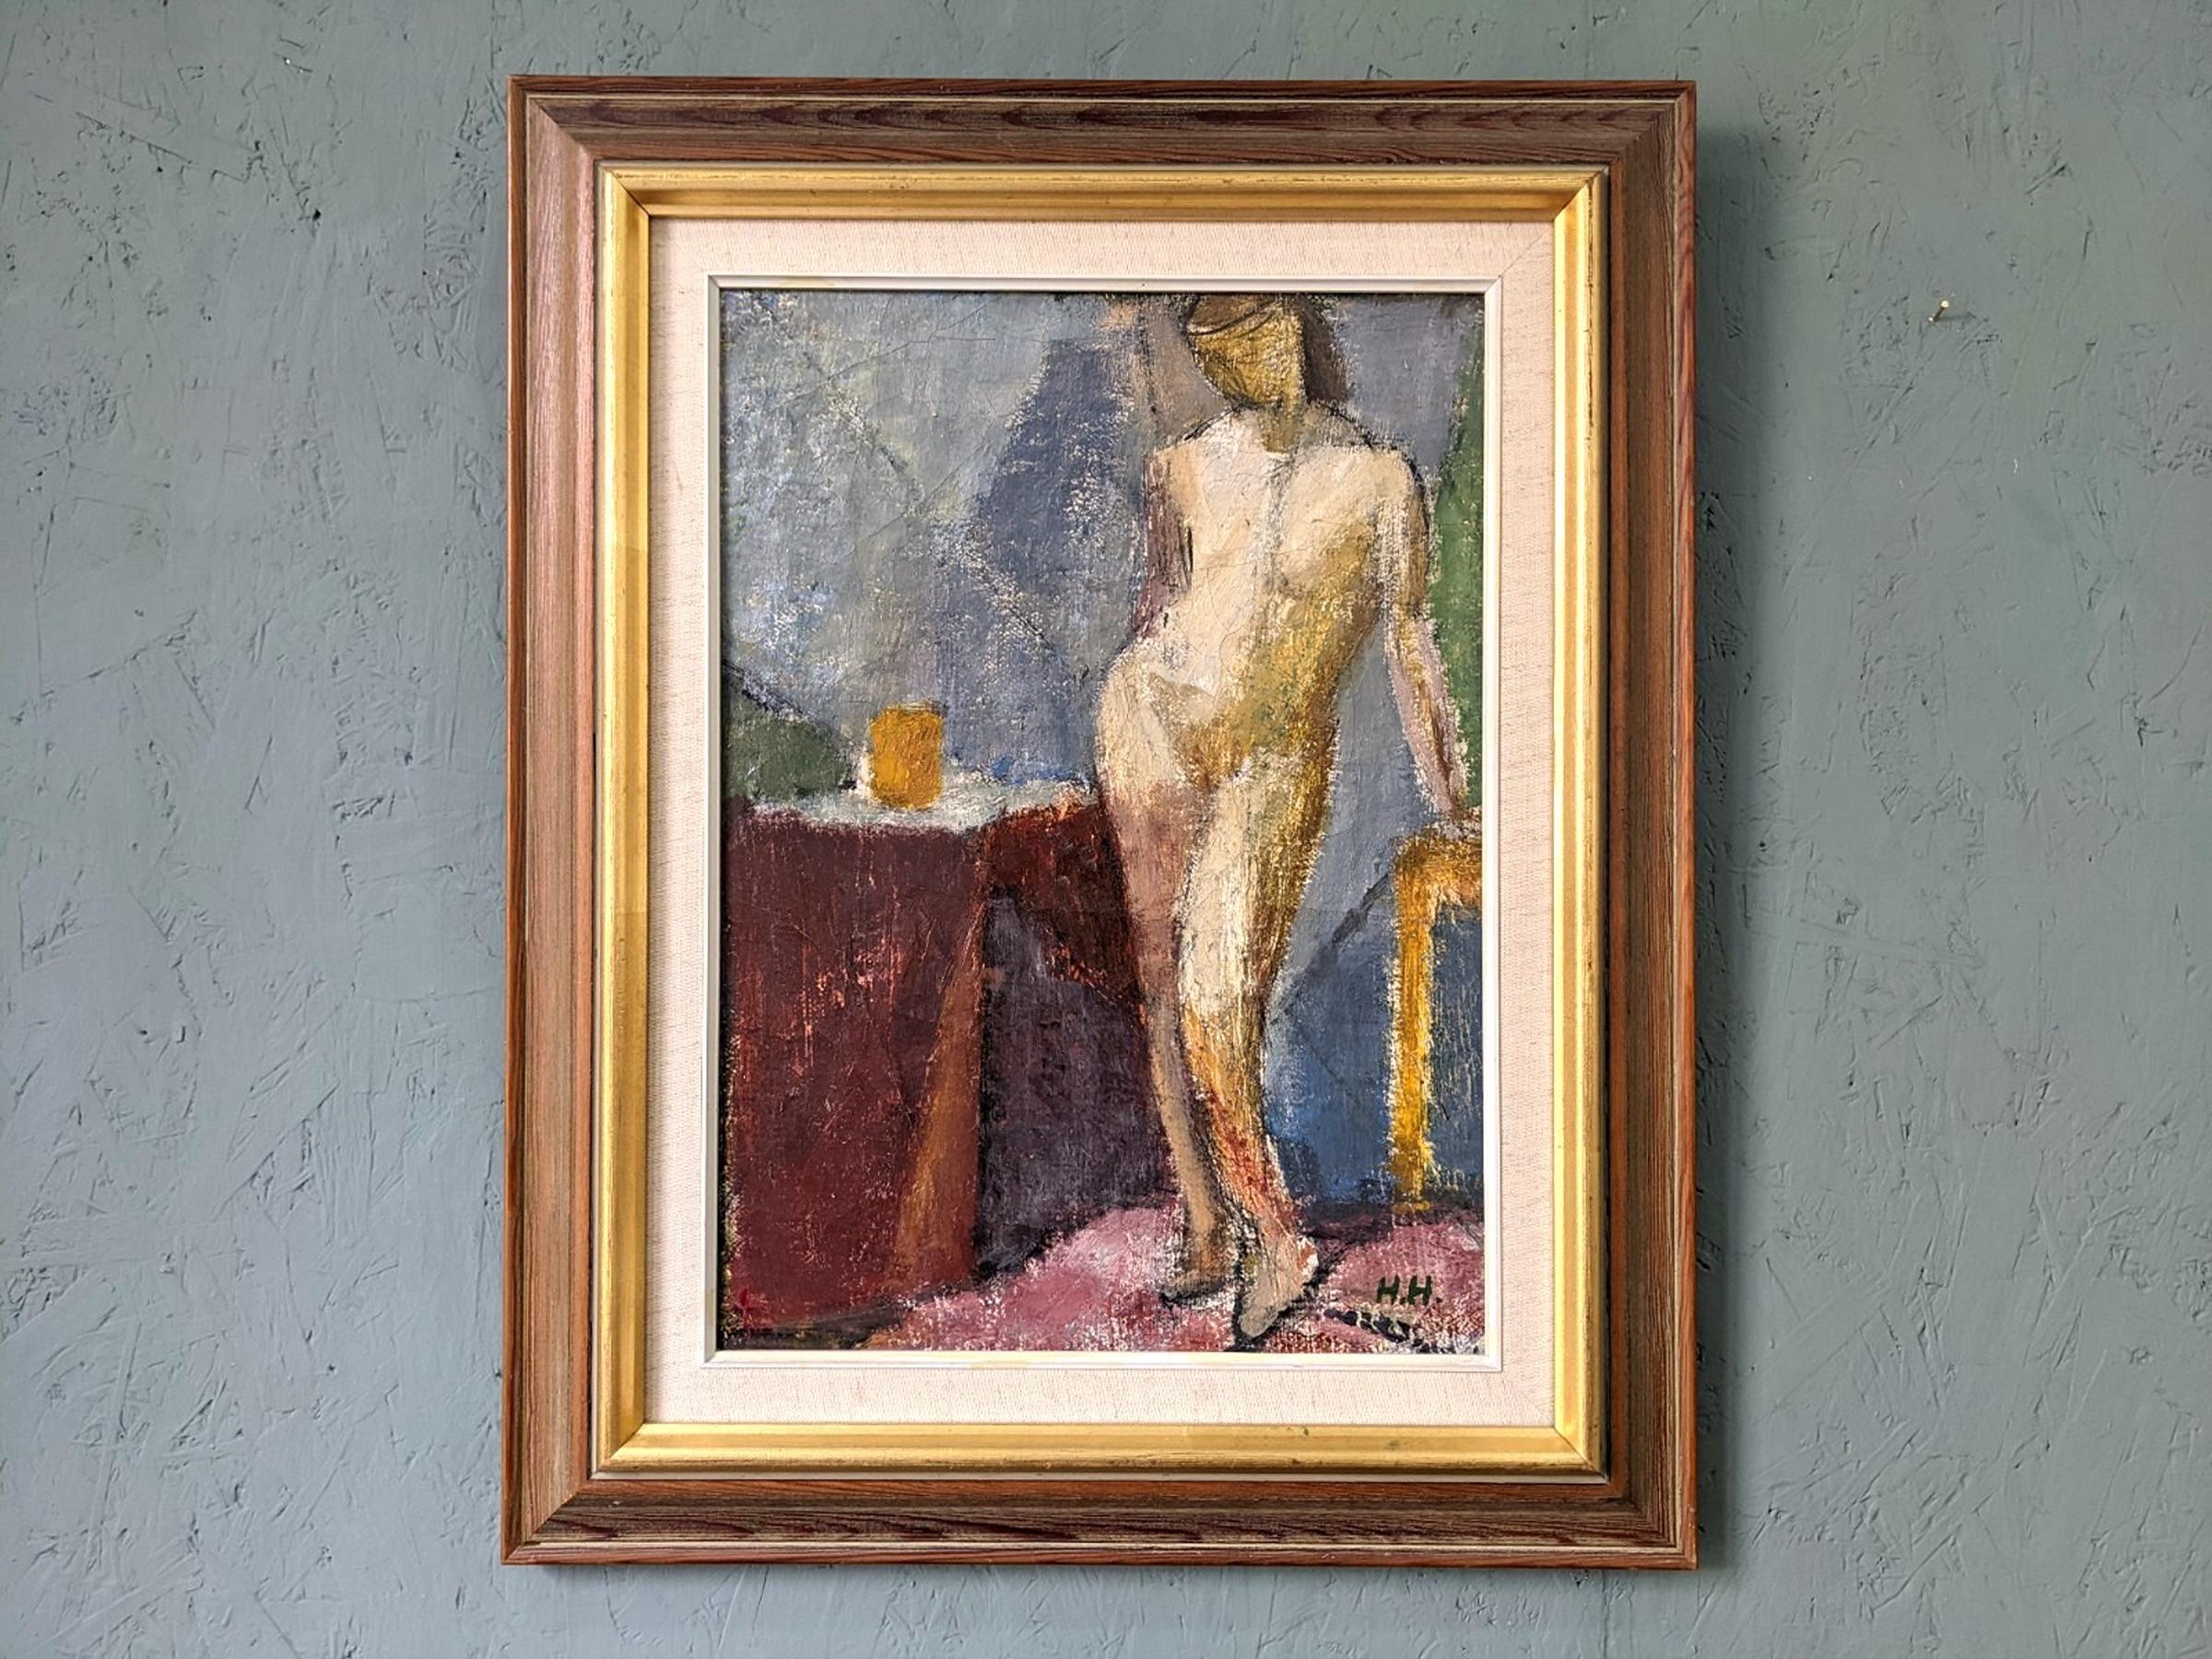 LEANING MODEL
Size: 59 × 47 cm (including frame)
Oil on canvas

Painted in 1945, this painting is a brilliantly executed mid century modernist figure study, painted in oil onto canvas.

There is a wonderful painterly quality to this piece – we get a